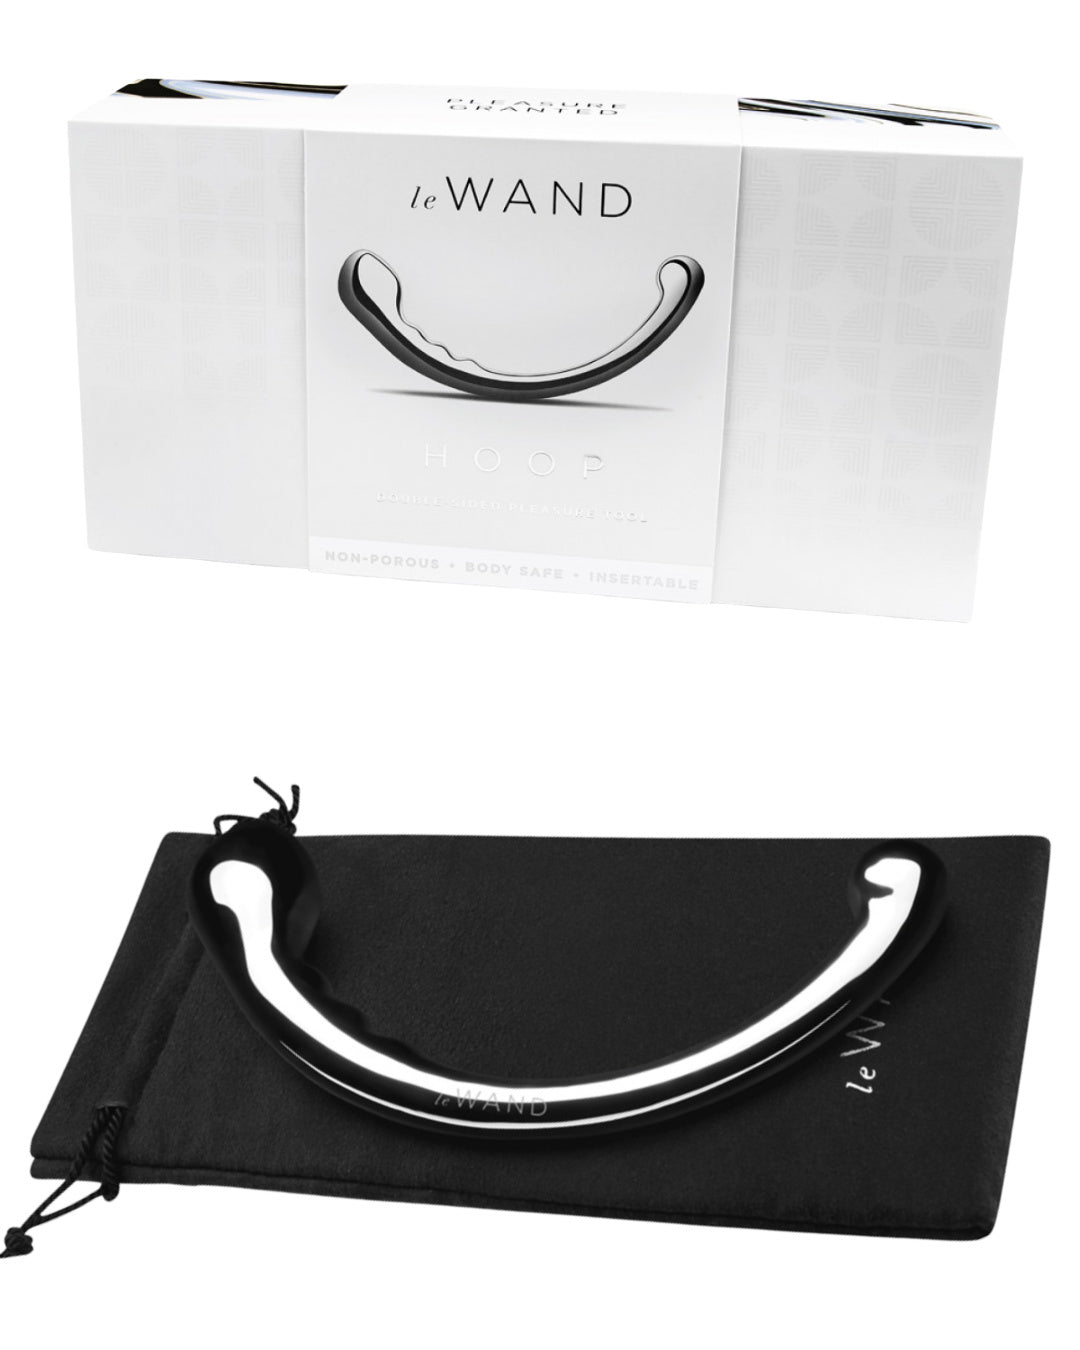 Le Wand Hoop Double Ended Stainless Steel Dildo laying on its black storage bag against a white background